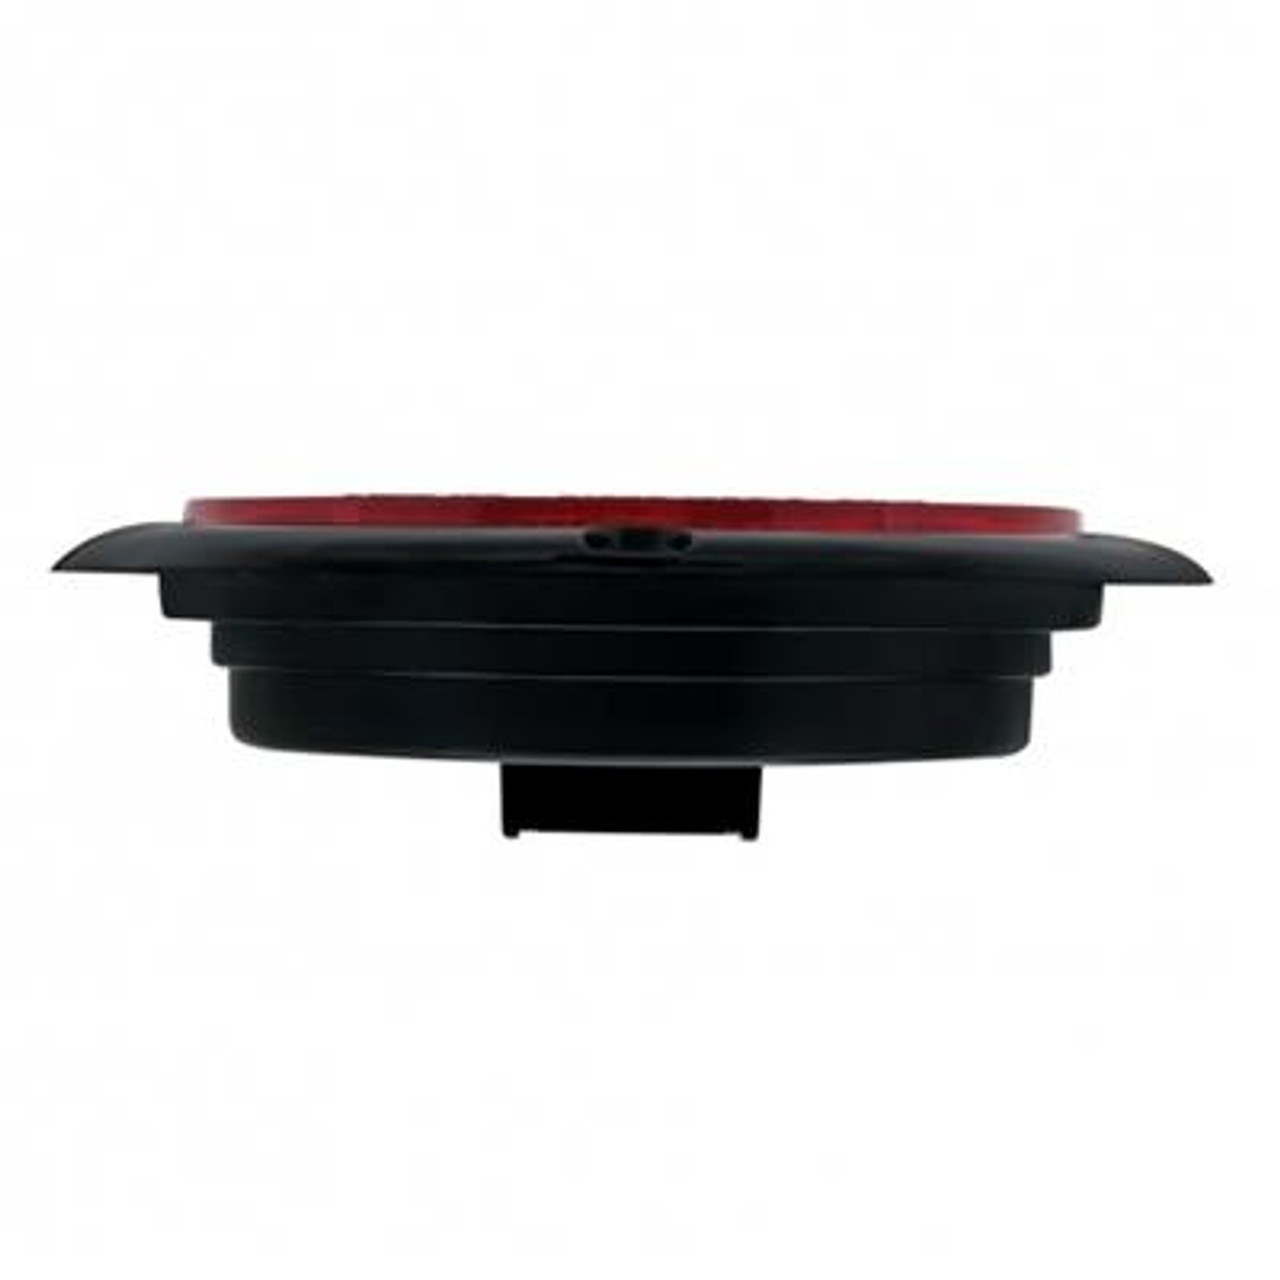 21 LED 4" Round Flange Mount GloLight (Stop, Turn & Tail) - Red LED/Red Lens